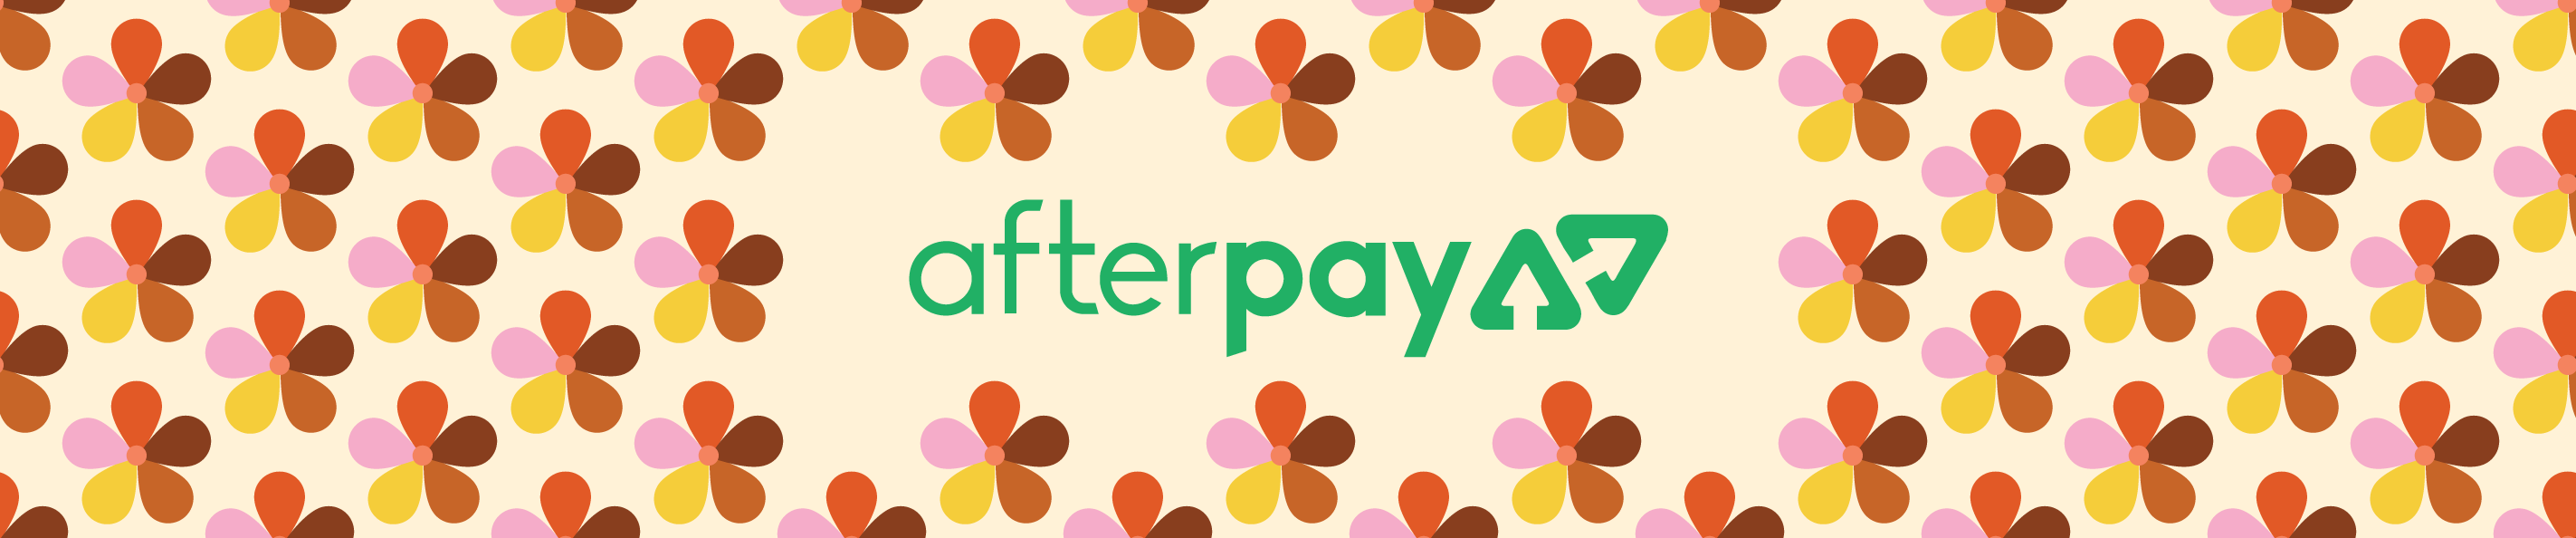 Lacey Lane's Afterpay: Shop Now, Pay Later - The Lane & Co